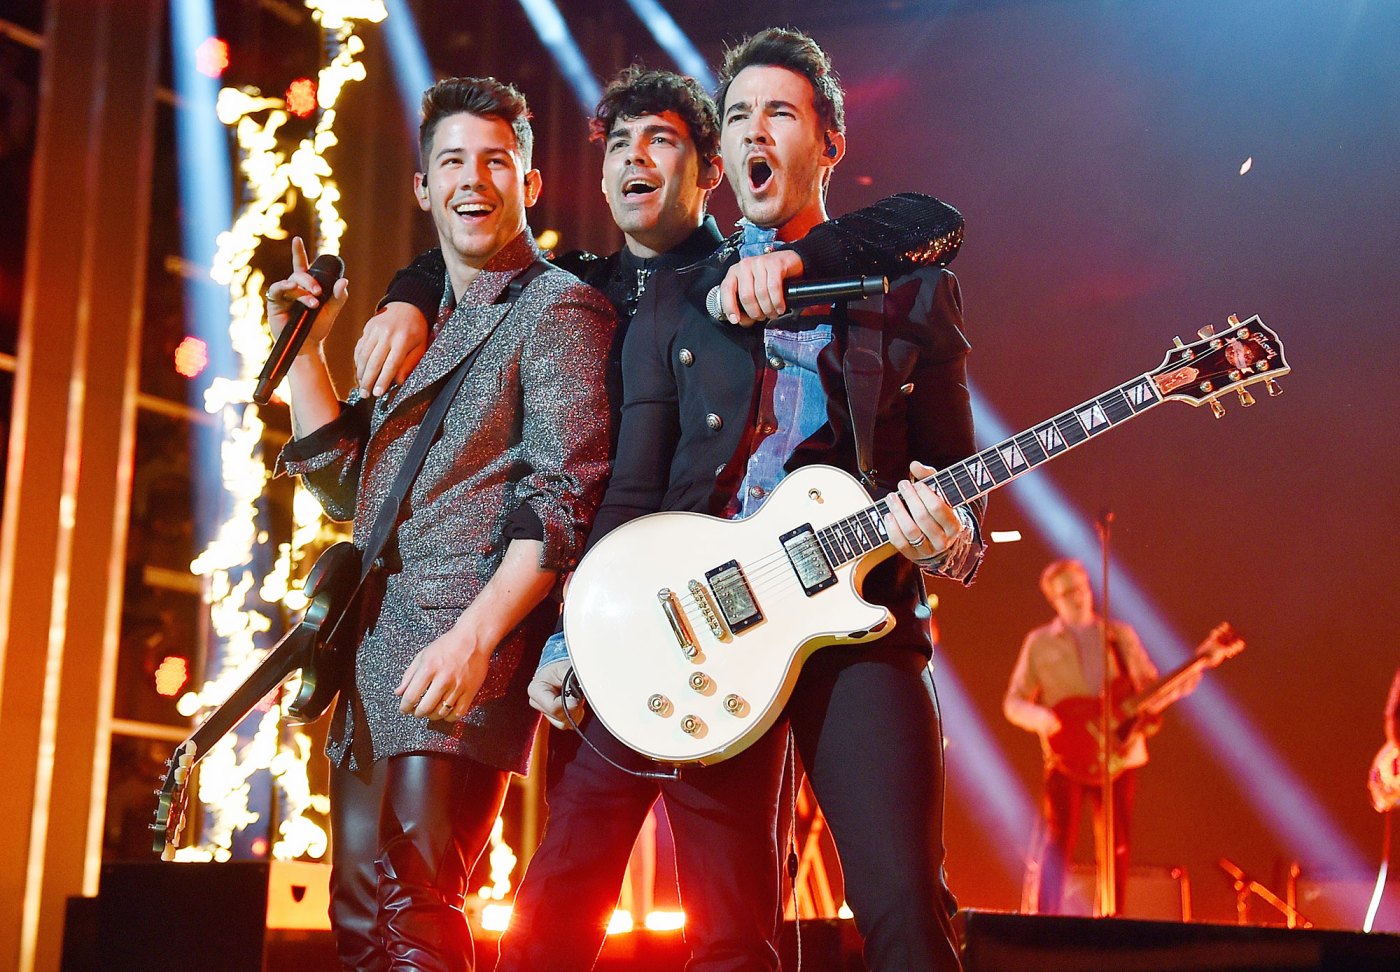 John Stamos Tells Jonas Brothers to Sing 'Full House' Song on Tour